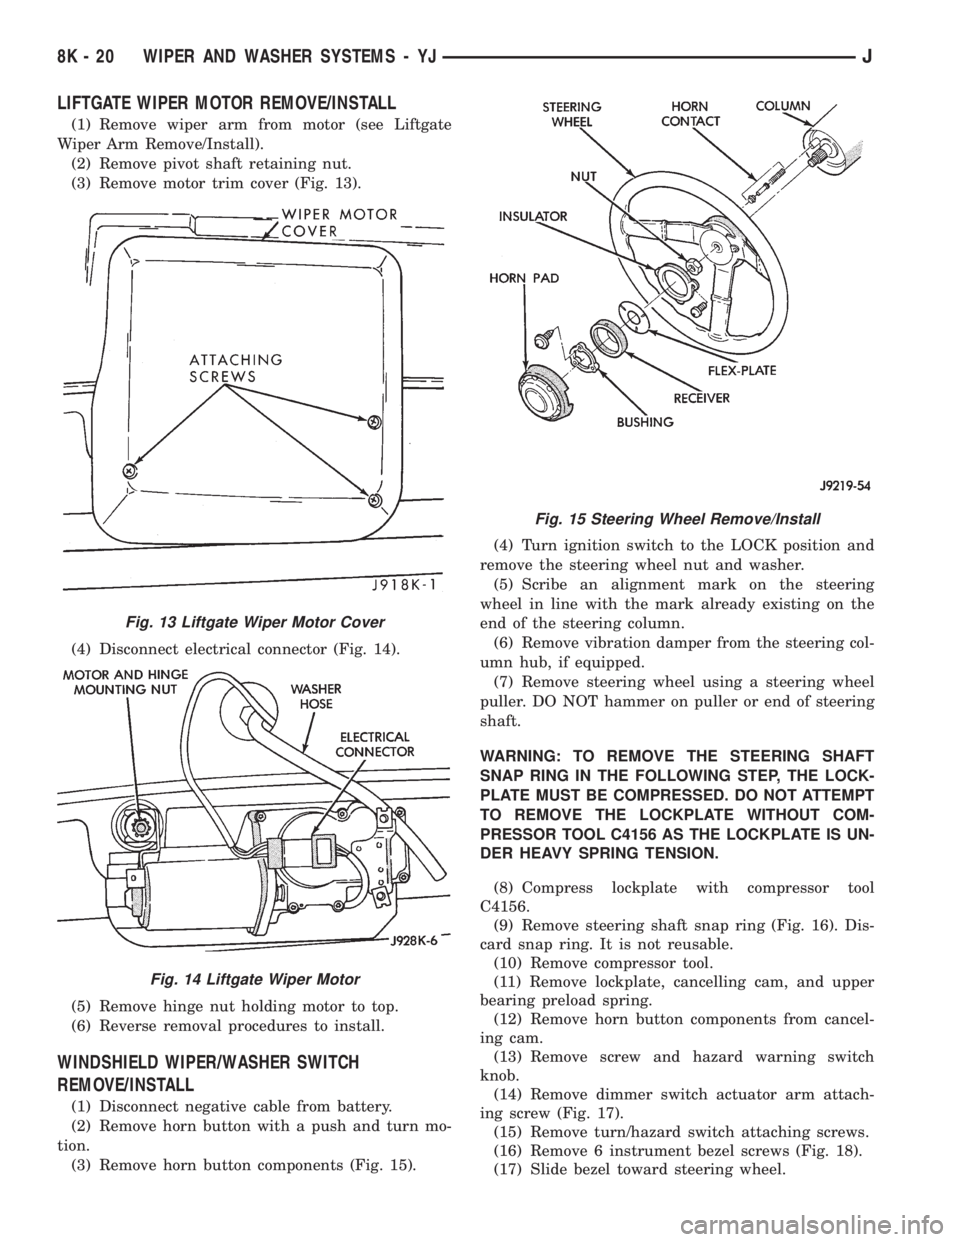 JEEP CHEROKEE 1995  Service Owners Manual LIFTGATE WIPER MOTOR REMOVE/INSTALL
(1) Remove wiper arm from motor (see Liftgate
Wiper Arm Remove/Install).
(2) Remove pivot shaft retaining nut.
(3) Remove motor trim cover (Fig. 13).
(4) Disconnect